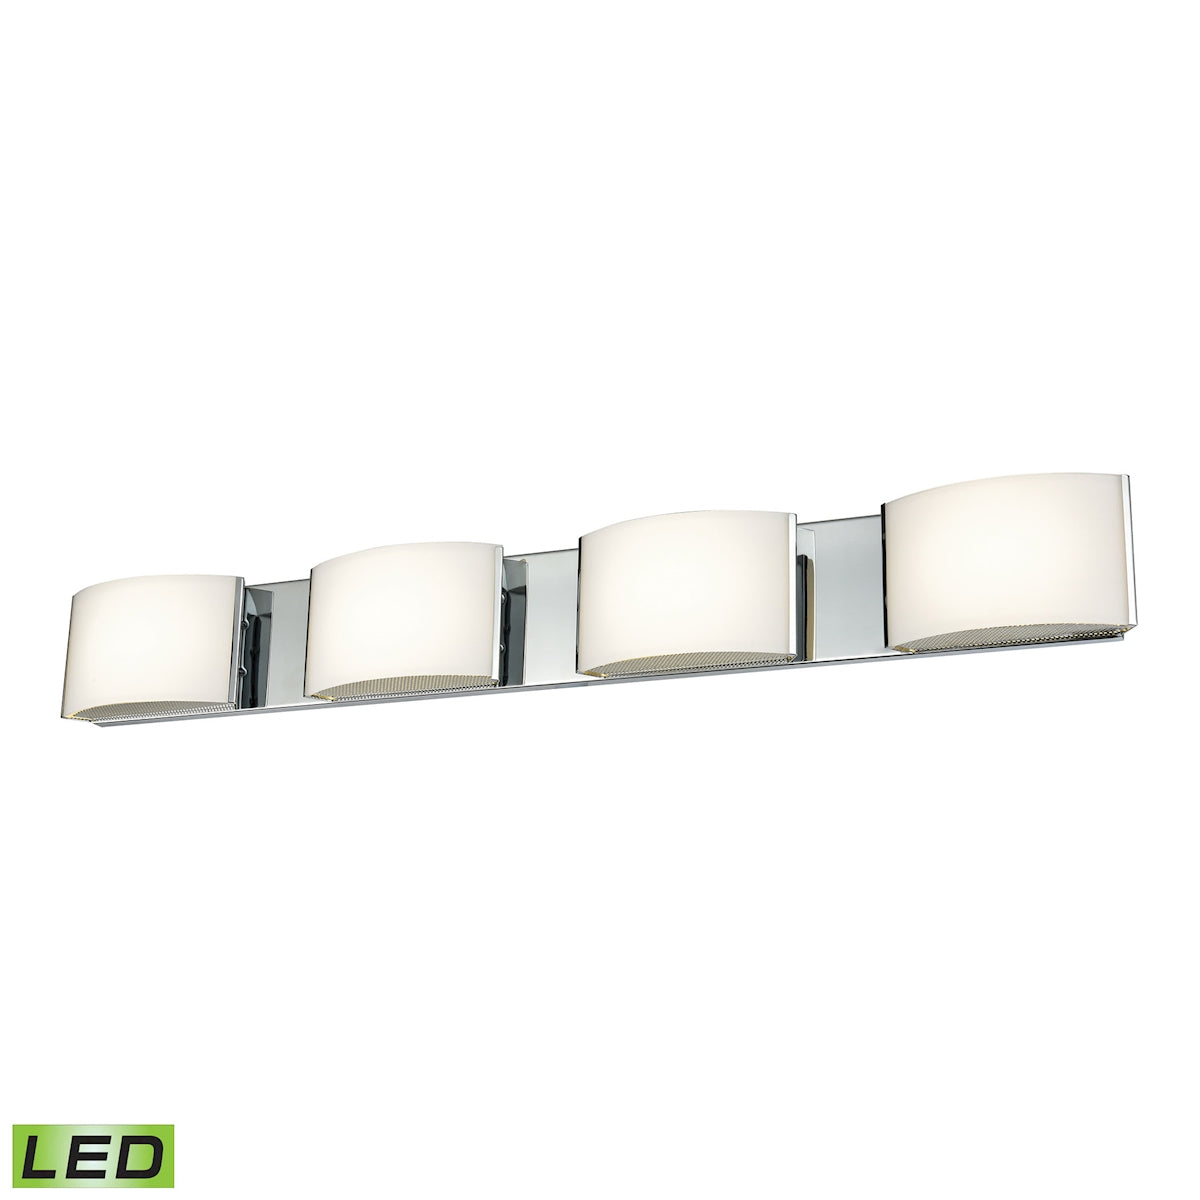 ELK Lighting BVL914-10-15 Pandora 4-Light Vanity Sconce in Chrome with Opal Glass - Integrated LED